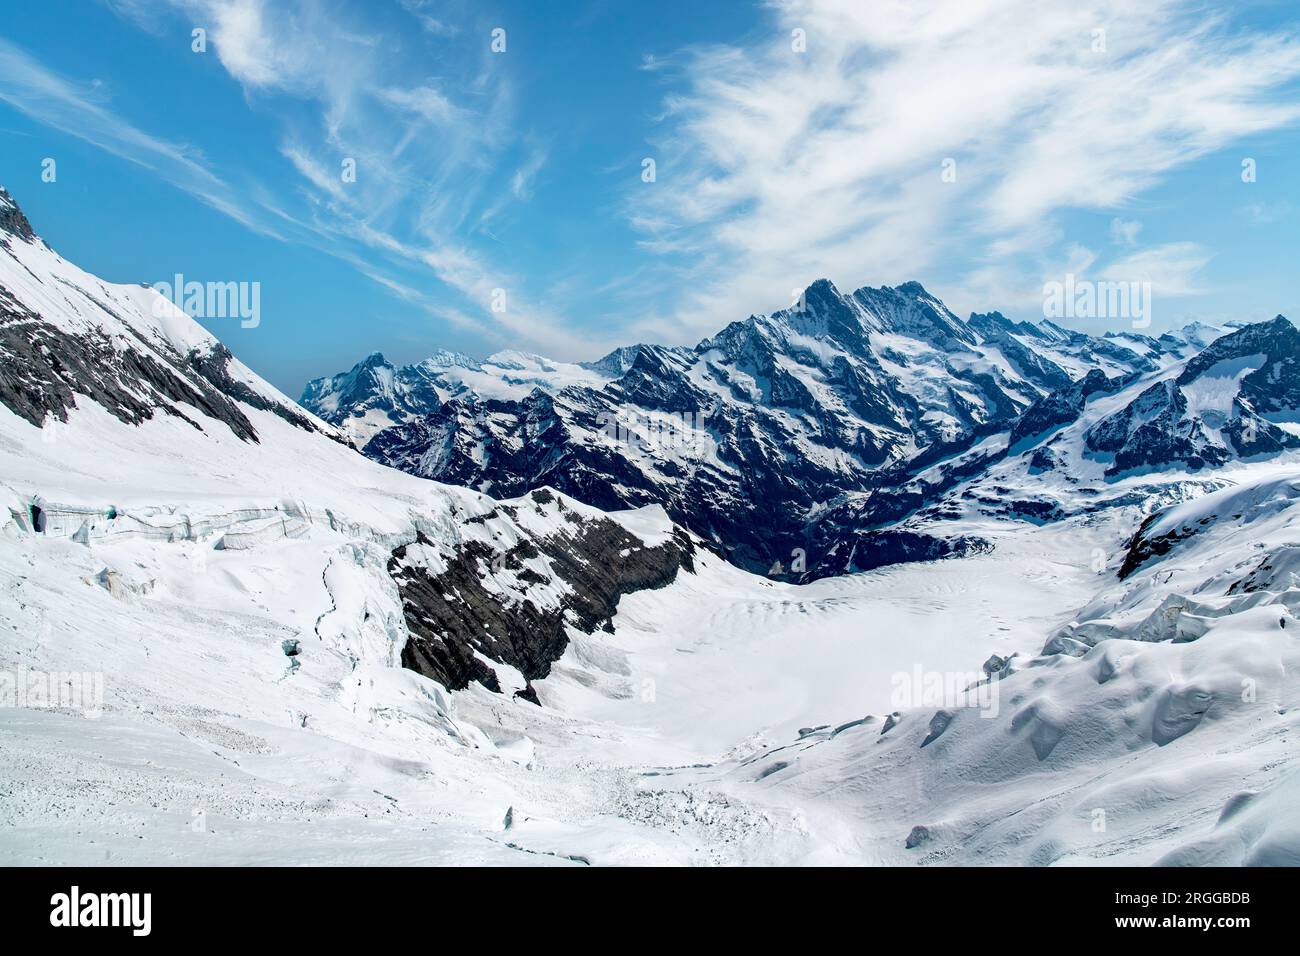 Panoramic view at 3,159 meters of the glacier Ischmeer (Ice Sea) Located behind the south-east face of the Eiger mountain peak in Switzerland close to Stock Photo